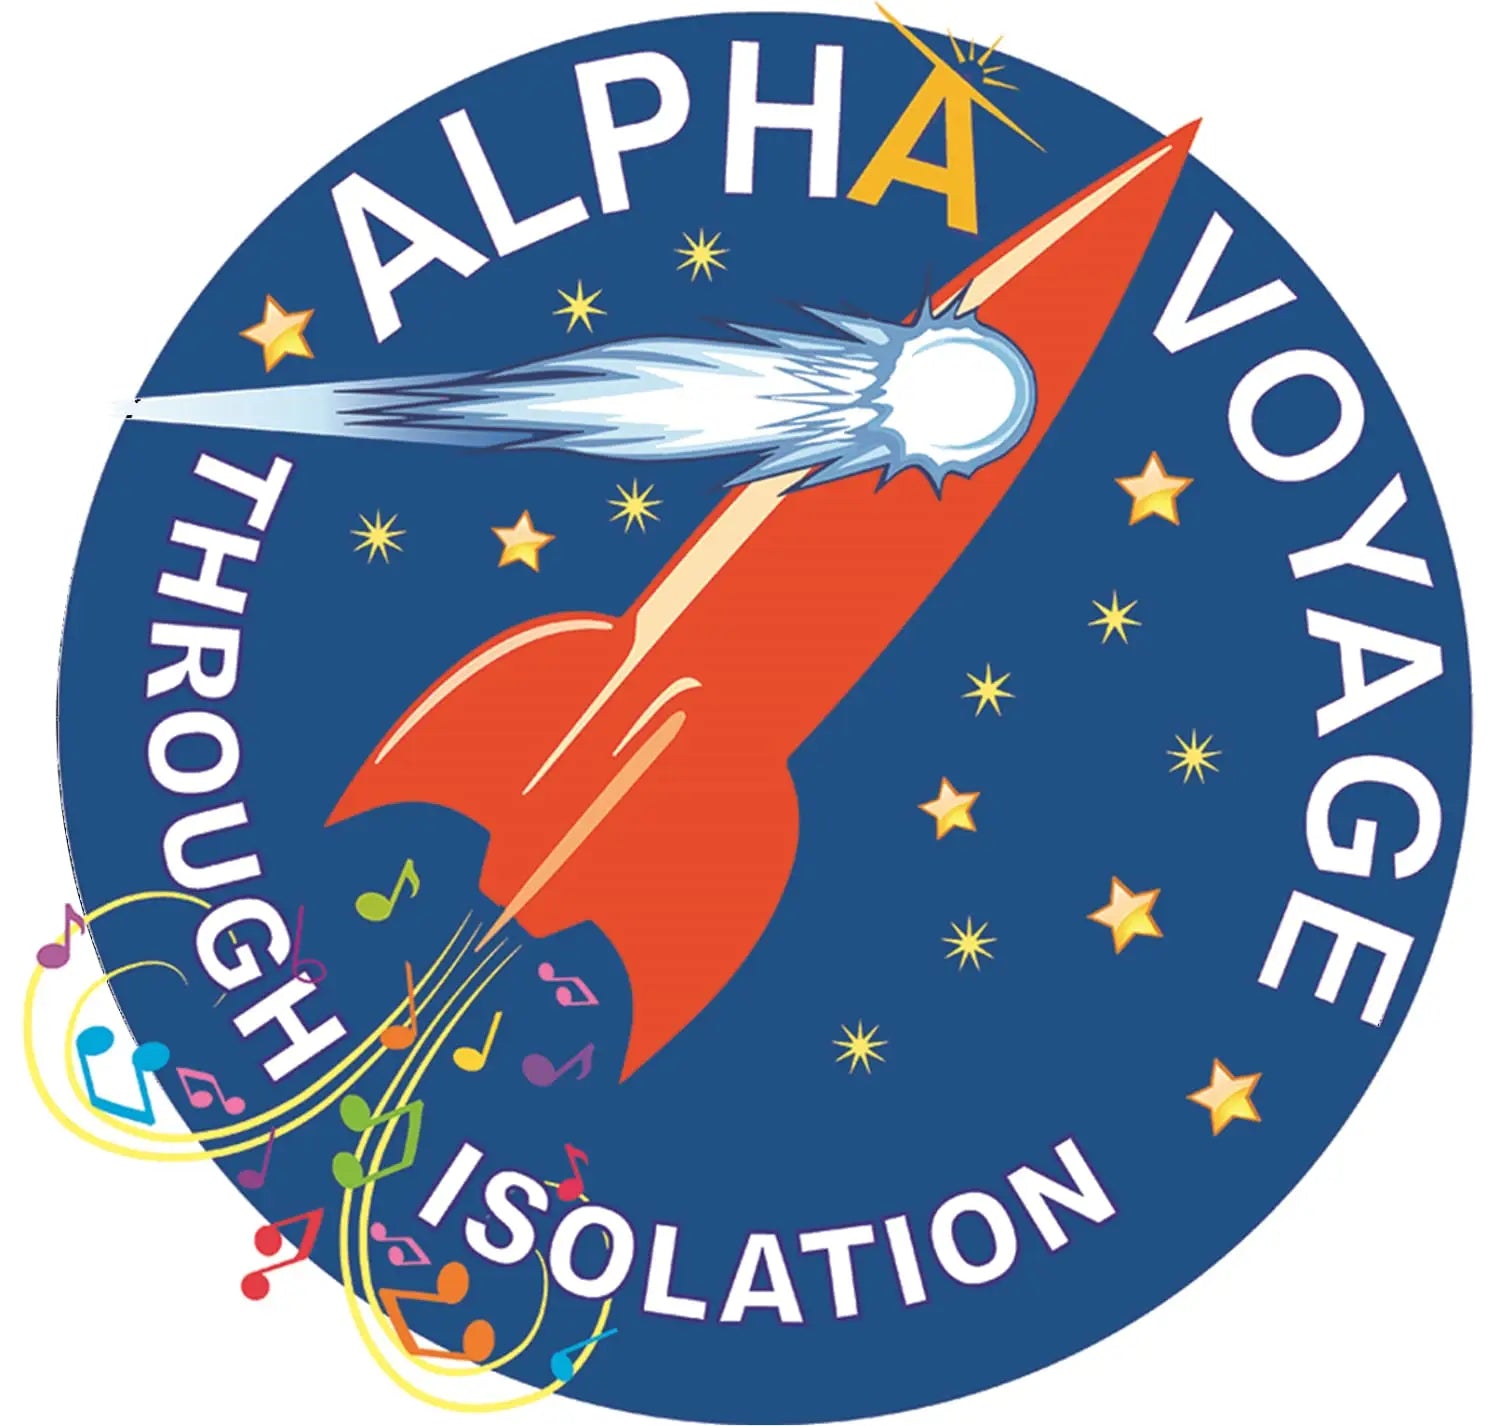 Currently Accepting Artist Submissions For The “Voyage Through Isolation” Exhibit